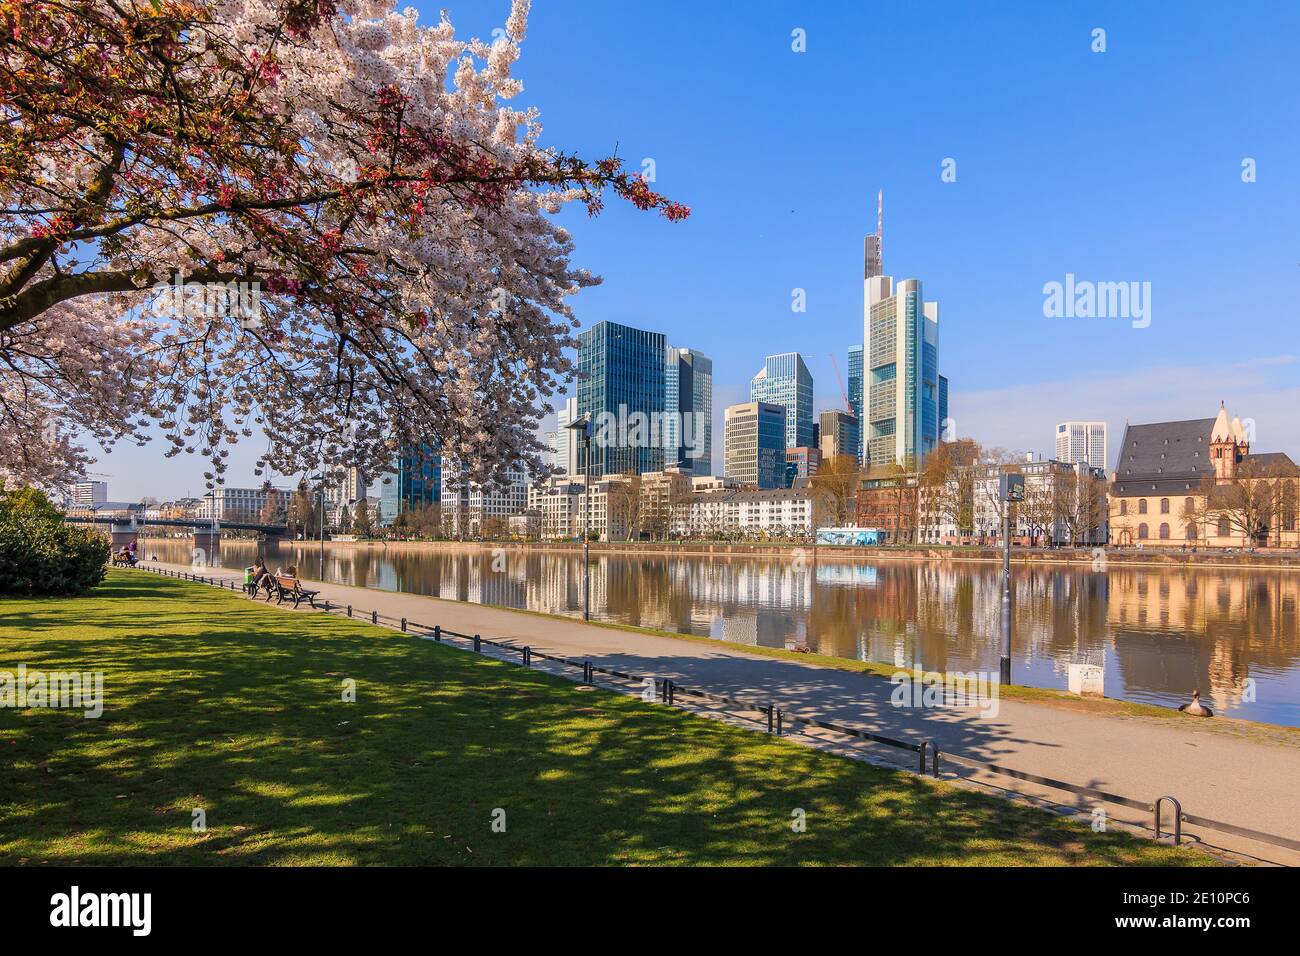 Frankfurt skyline with skyscrapers in the business and financial district. Reflections on the water from the river Main. Tree with blossoms in the sun Stock Photo